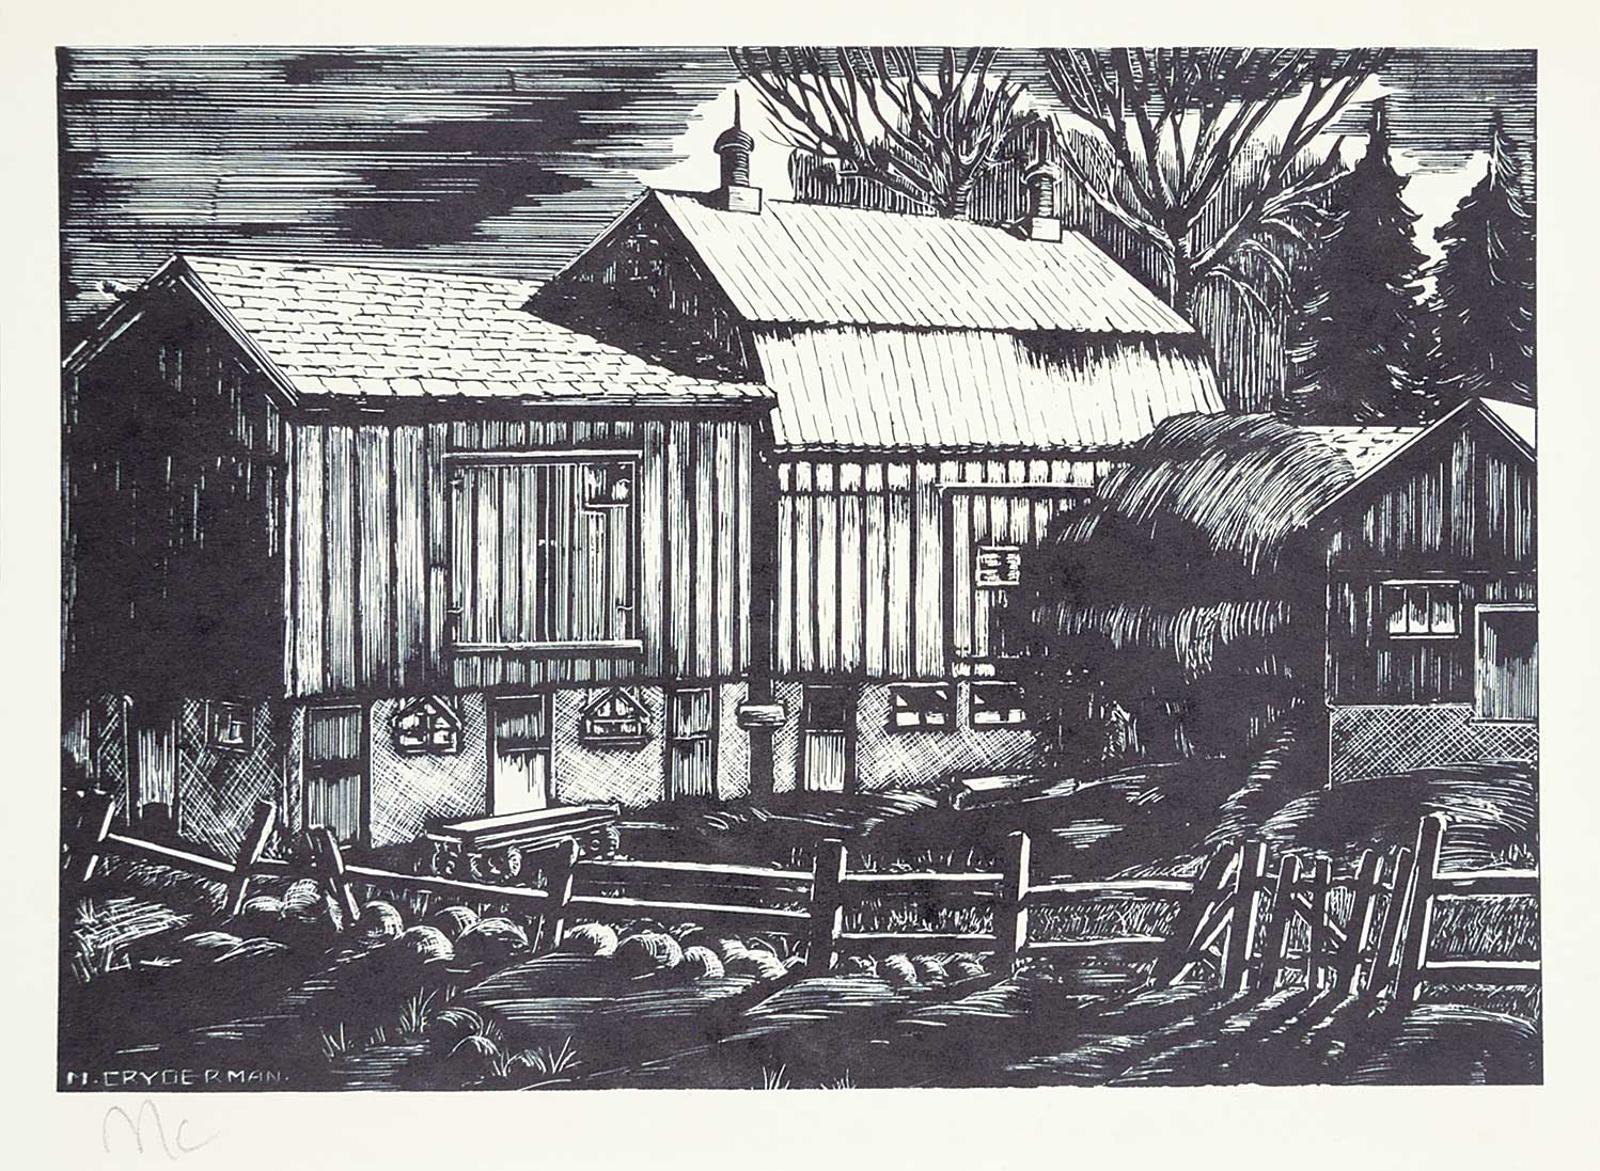 Mackie Cryderman - Untitled - View of the Farm